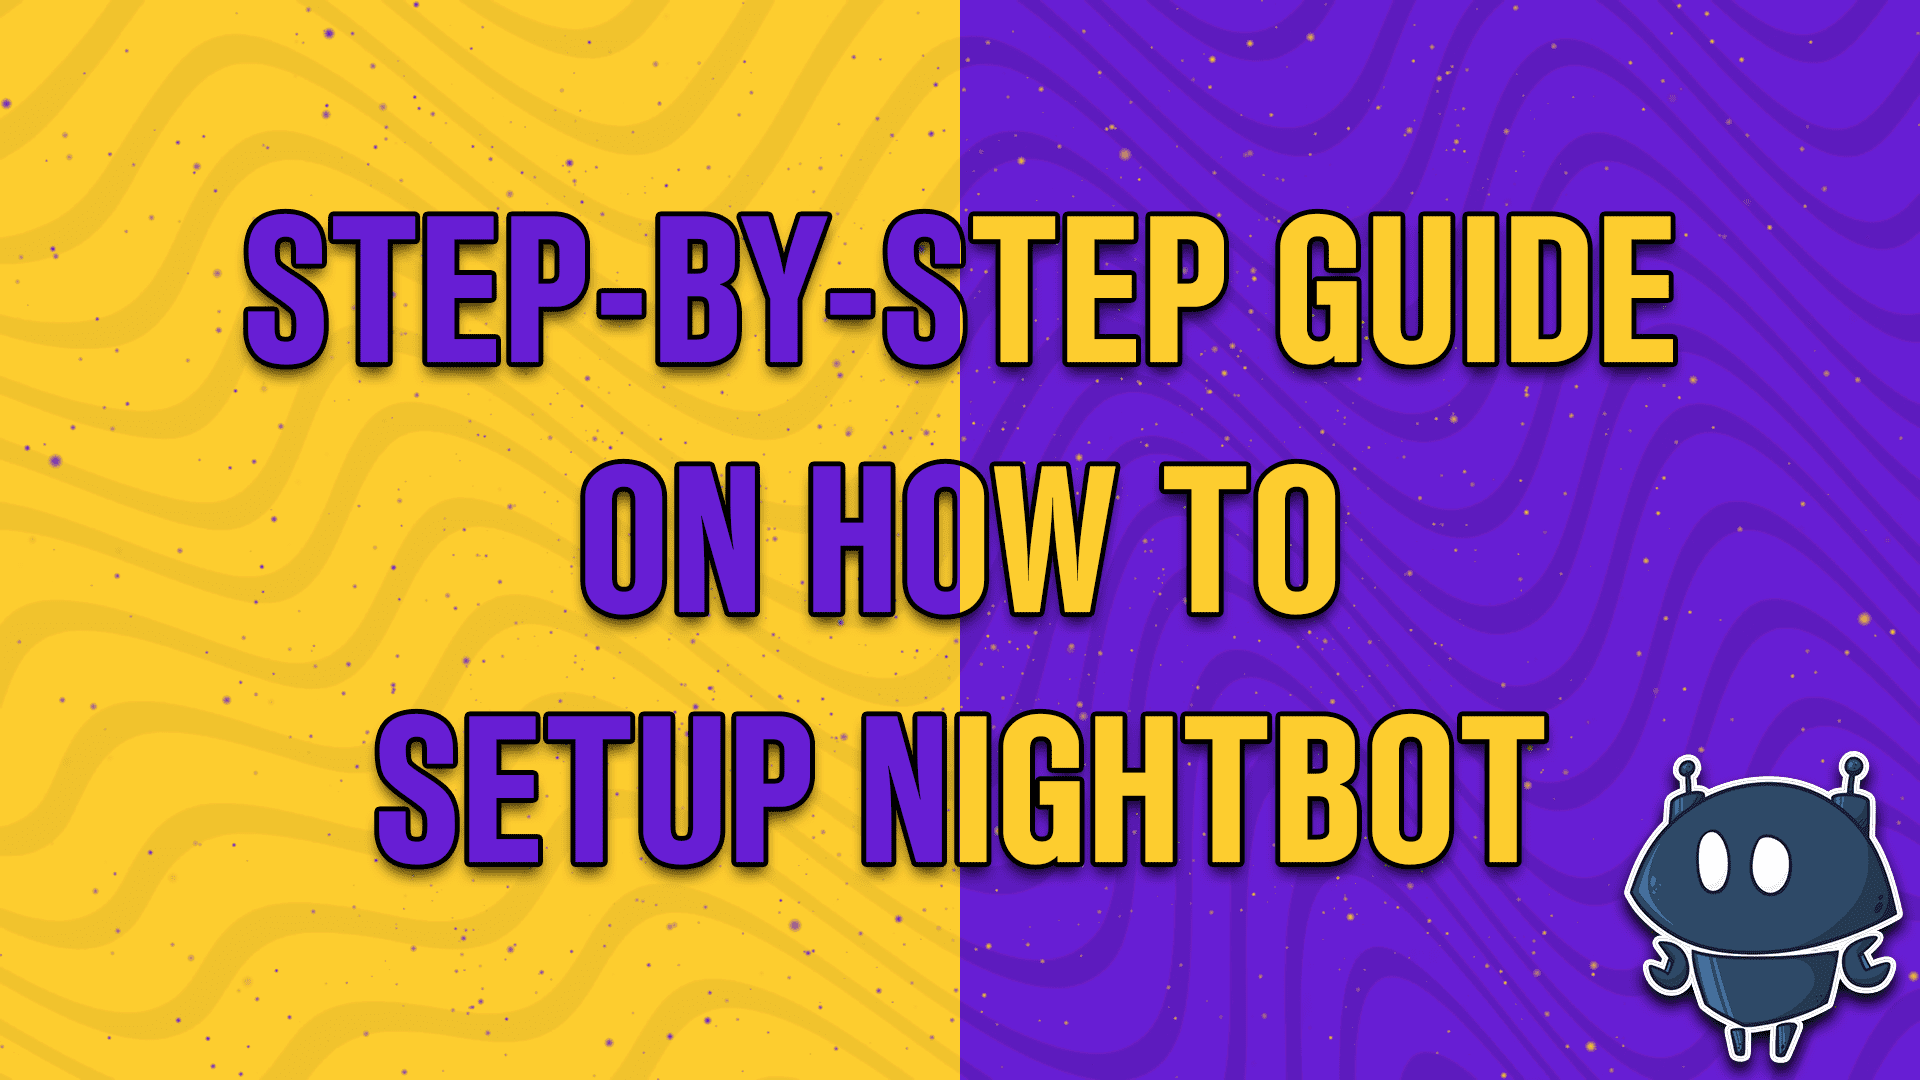 Step by step guide on how to Setup Nightbot - StreamBee